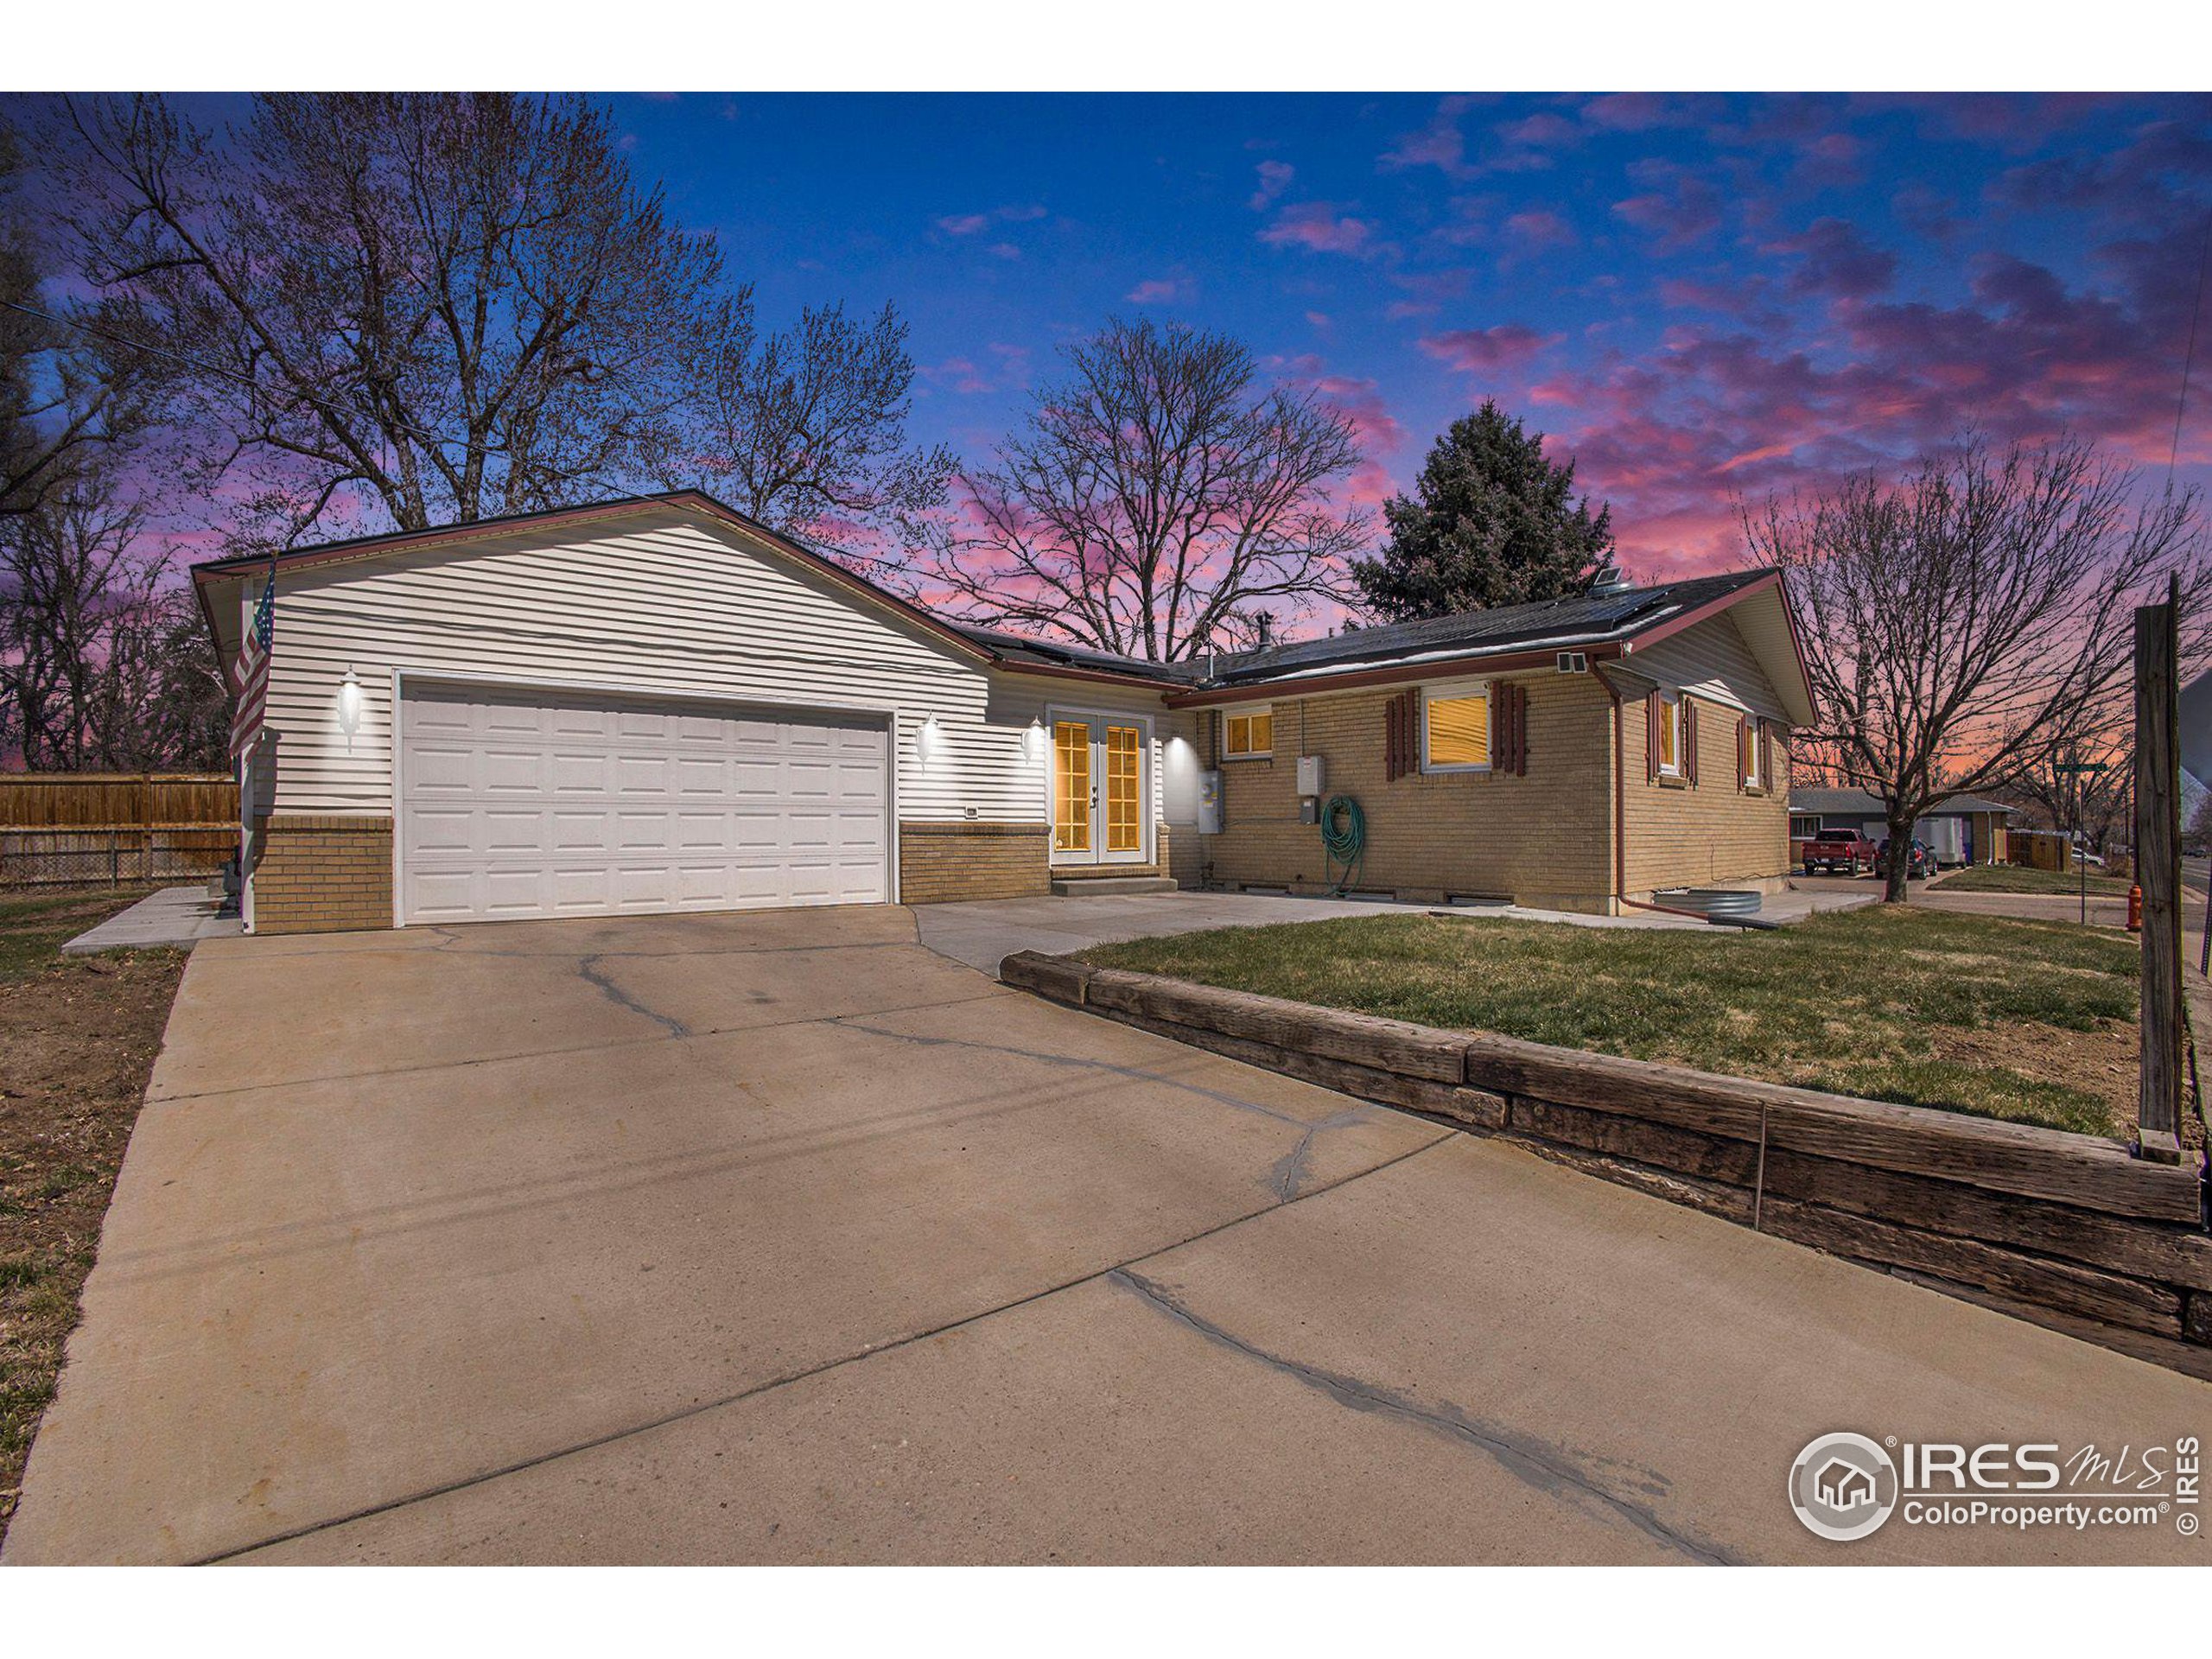 2659 14th Ave Ct, Greeley, CO 80631 - MLS 985086 - Coldwell Banker